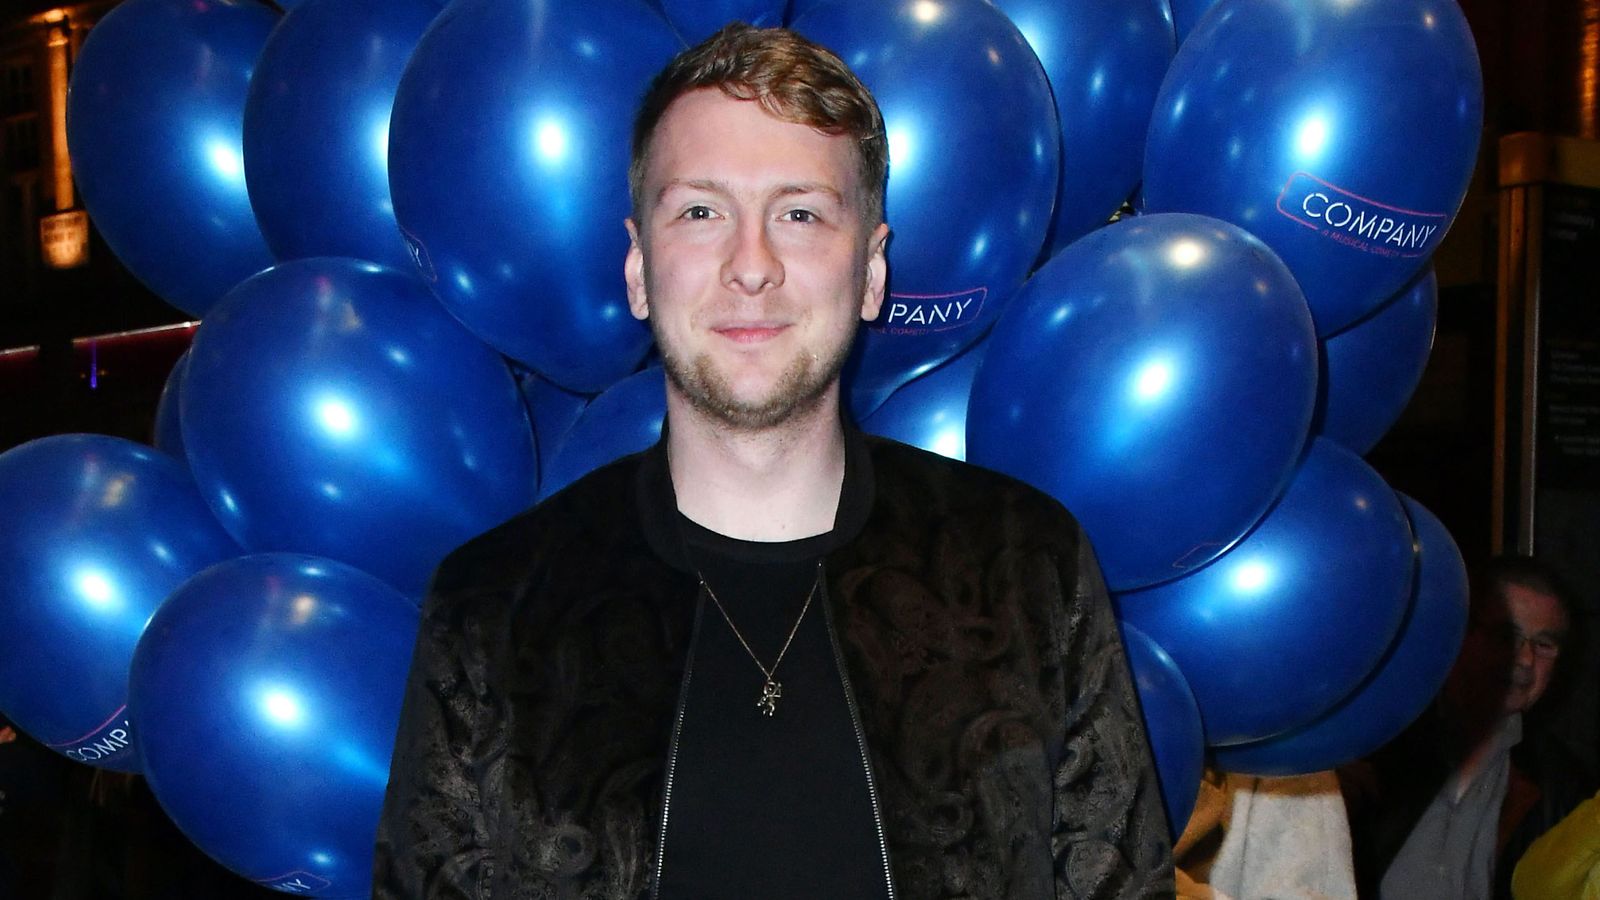 Joe Lycett says 'anger' over friend's death prompted spoof Sue Gray report